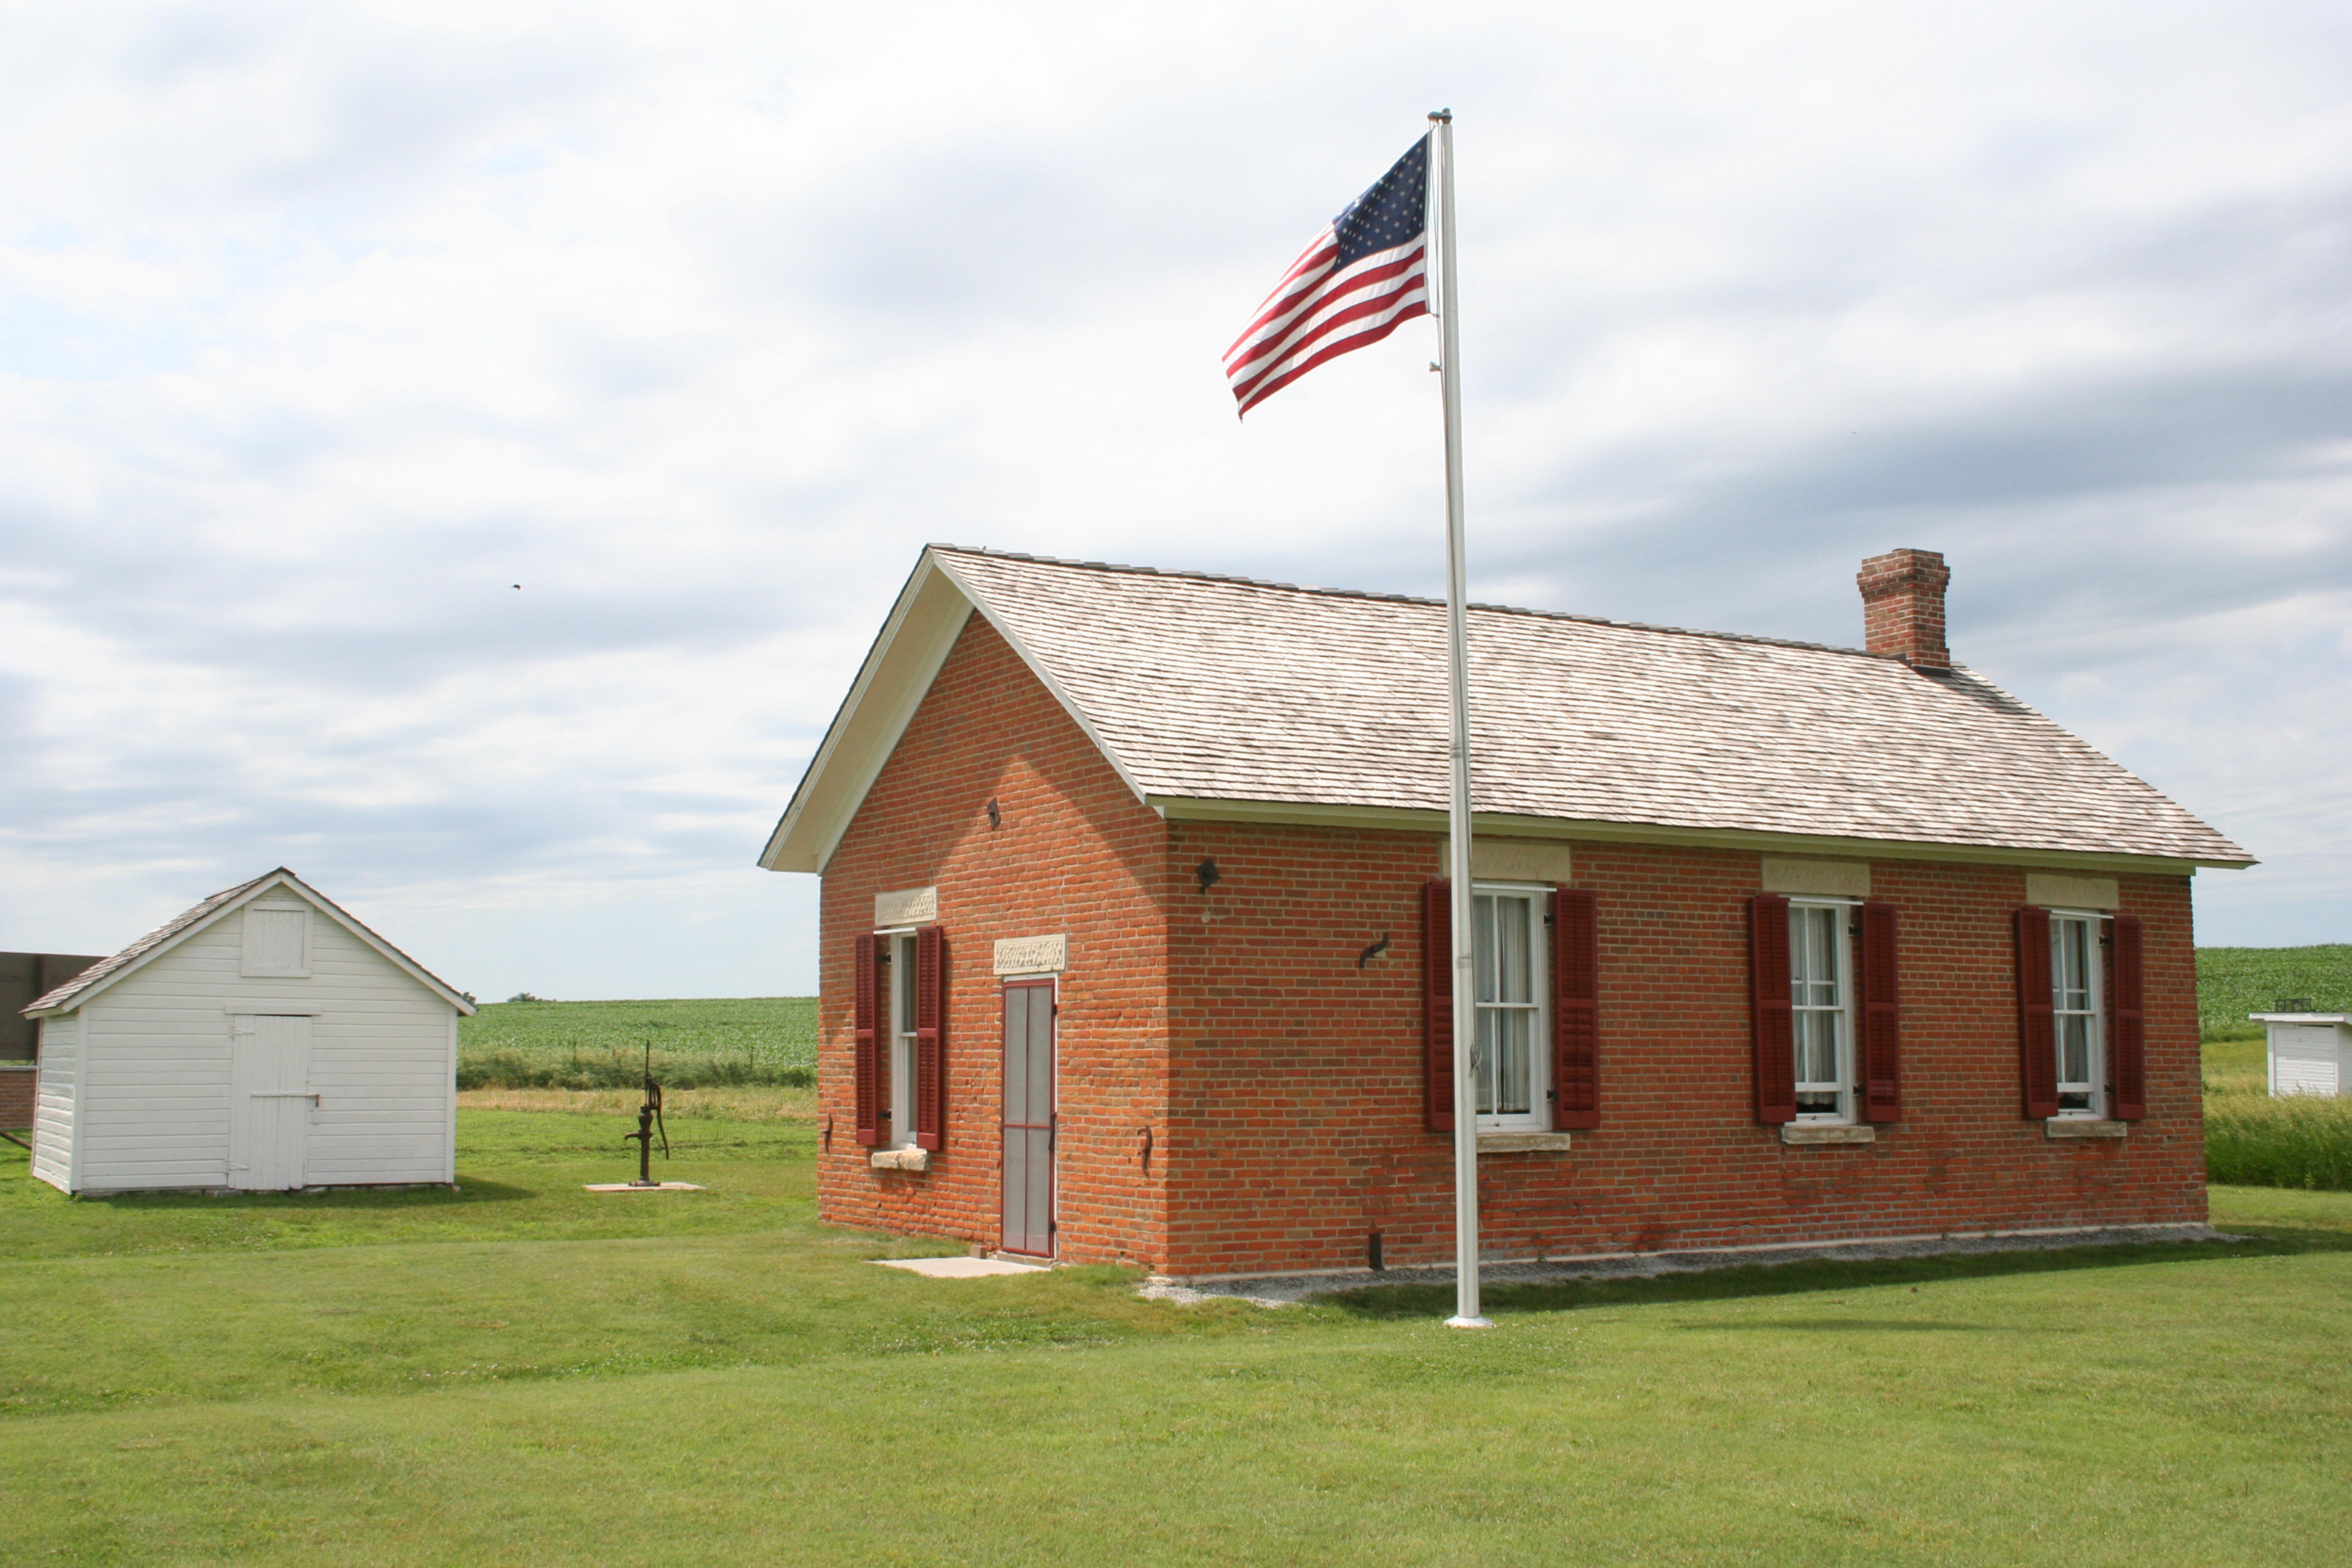 A historic one room schoolhouse